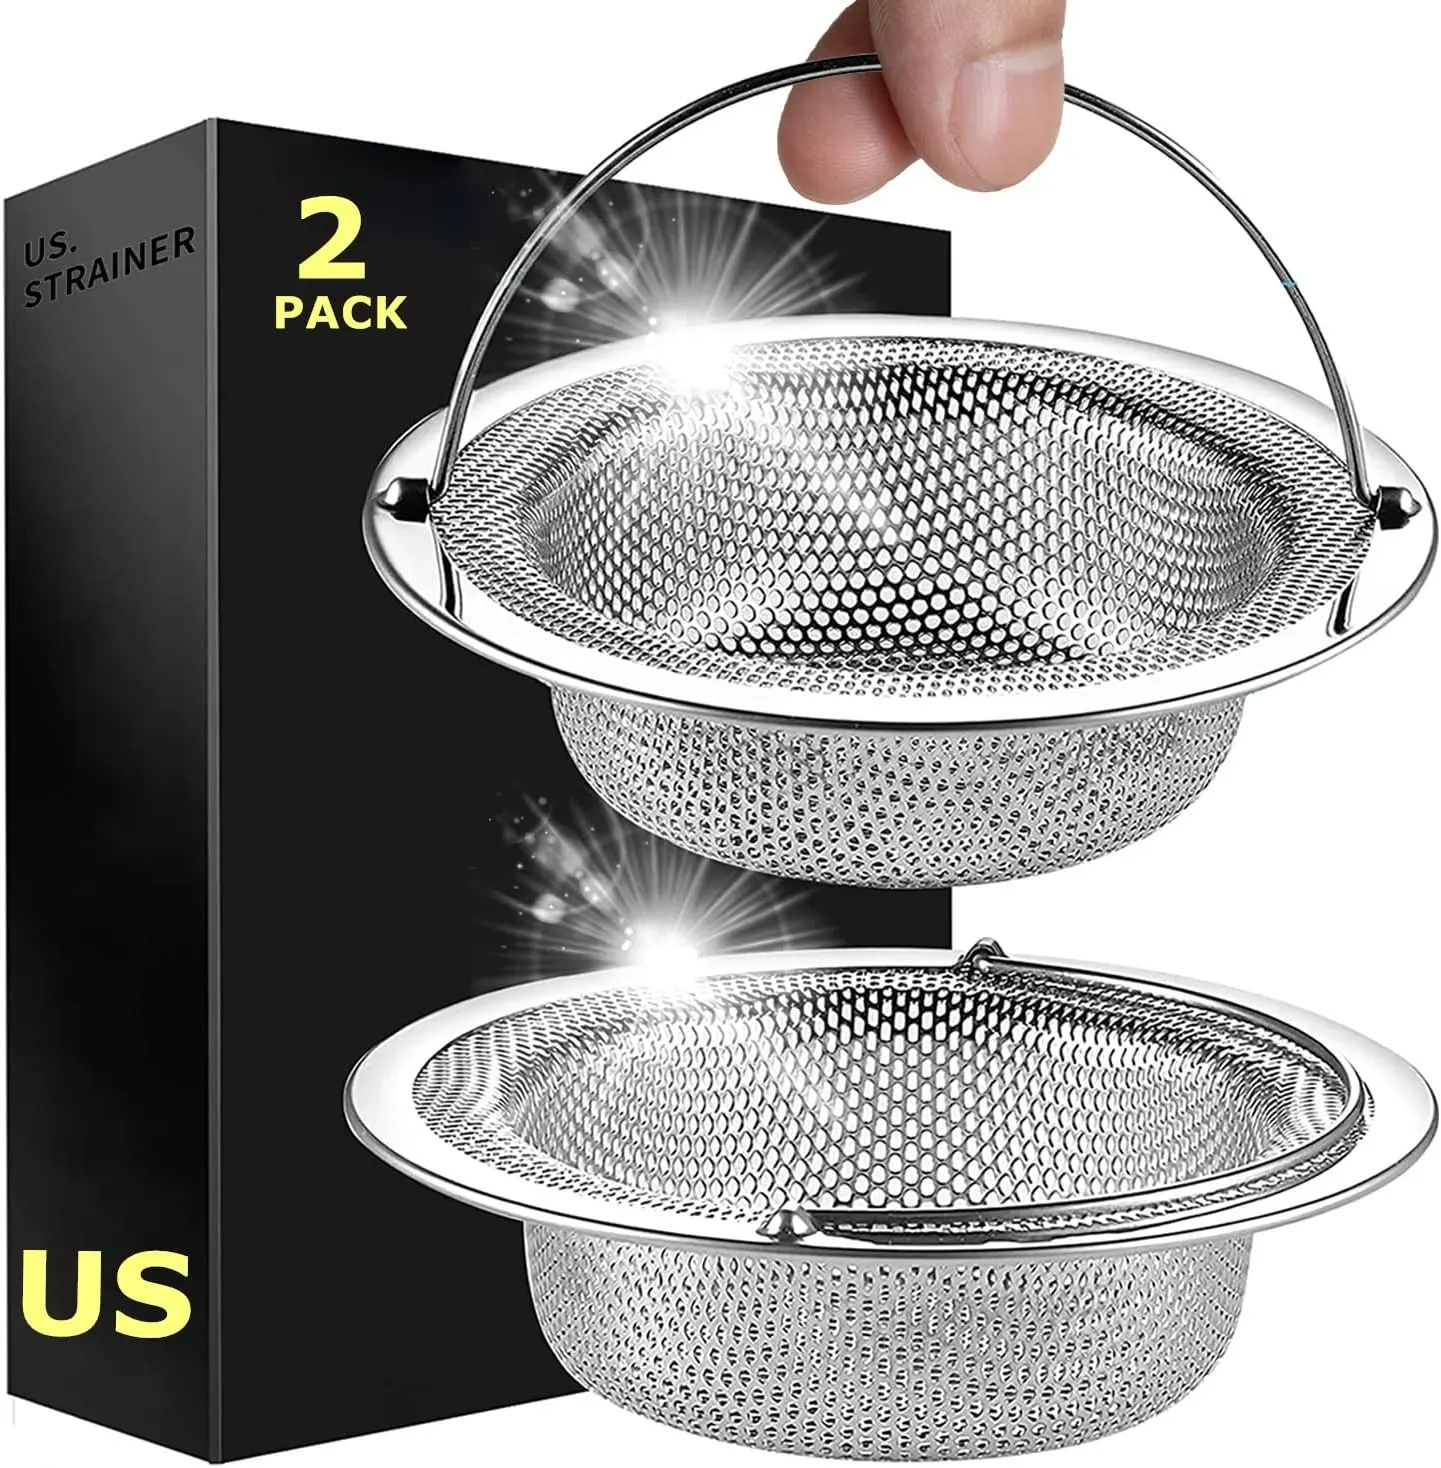 

Kitchen Enhancement Stainless Steel Sink Drain Strainer Wide Rim Perfect for Most Rust Free Heavy Duty Anti Clogging Sink Drains